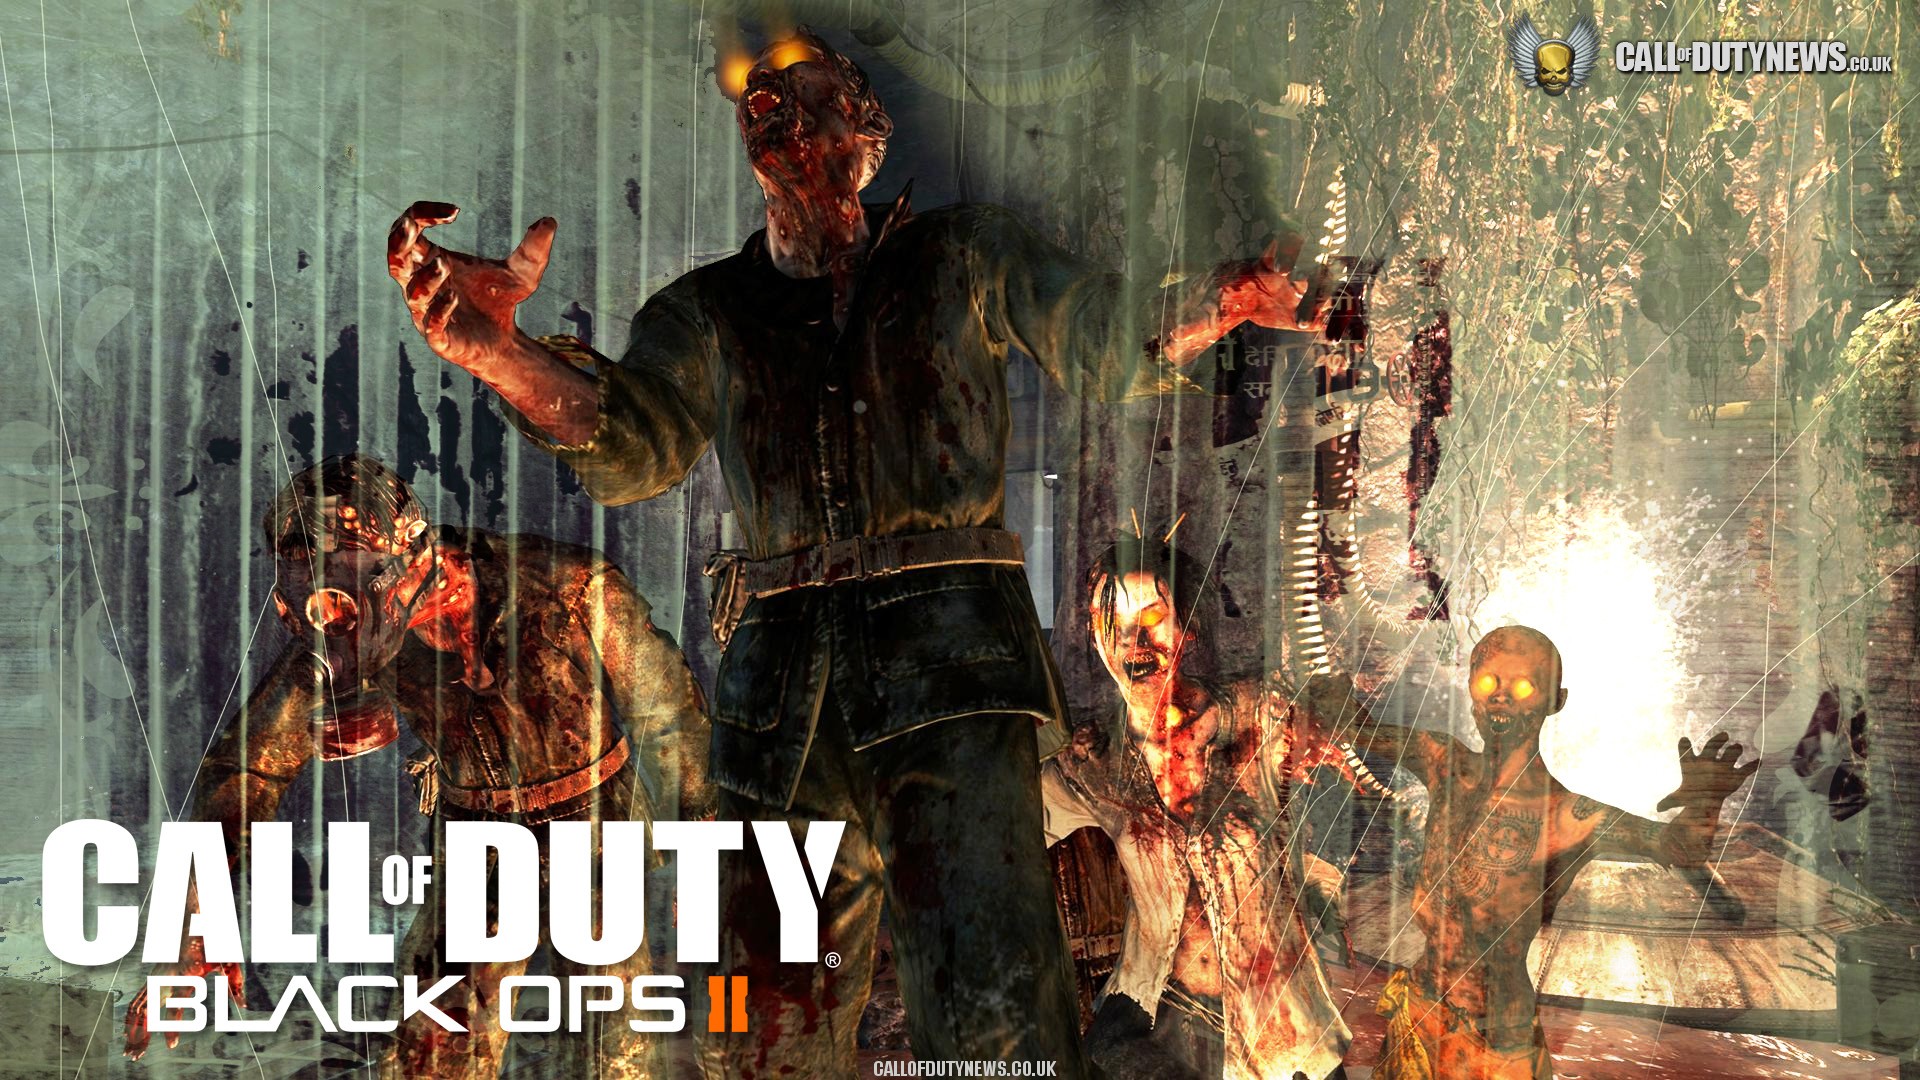 Of Duty Black Ops Zombies Wallpaper HDcall